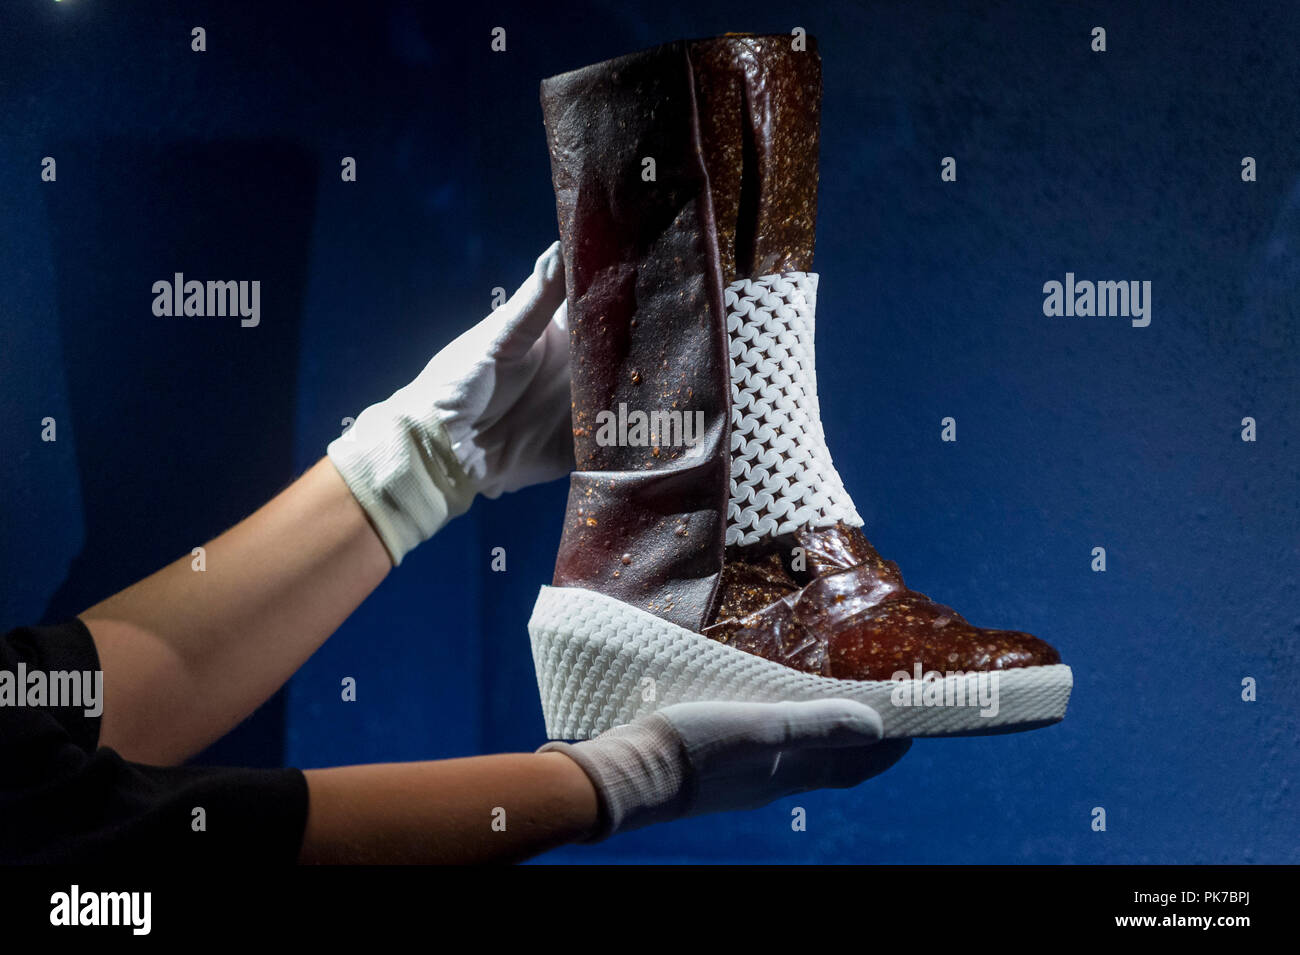 London, UK.  11 September 2018. A staff member presents 'Caskia/Growing a Mars Boot', designed by Liz Ciokajlo (OurOwnSkin) with Maurizio Montalti  at a preview of the 87 nominees for the eleventh Beazley Designs of the Year exhibition and awards at the Design Museum in Kensington.  The boot is made from mycellium fungus, fed on human sweat, and addresses the problem that Mars explorers will face in producing their own provisions and materials. The exhibition runs 12 September to 6 January 2019 and celebrates the most innovative designs of the last year.   Credit: Stephen Chung / Alamy Live Ne Stock Photo